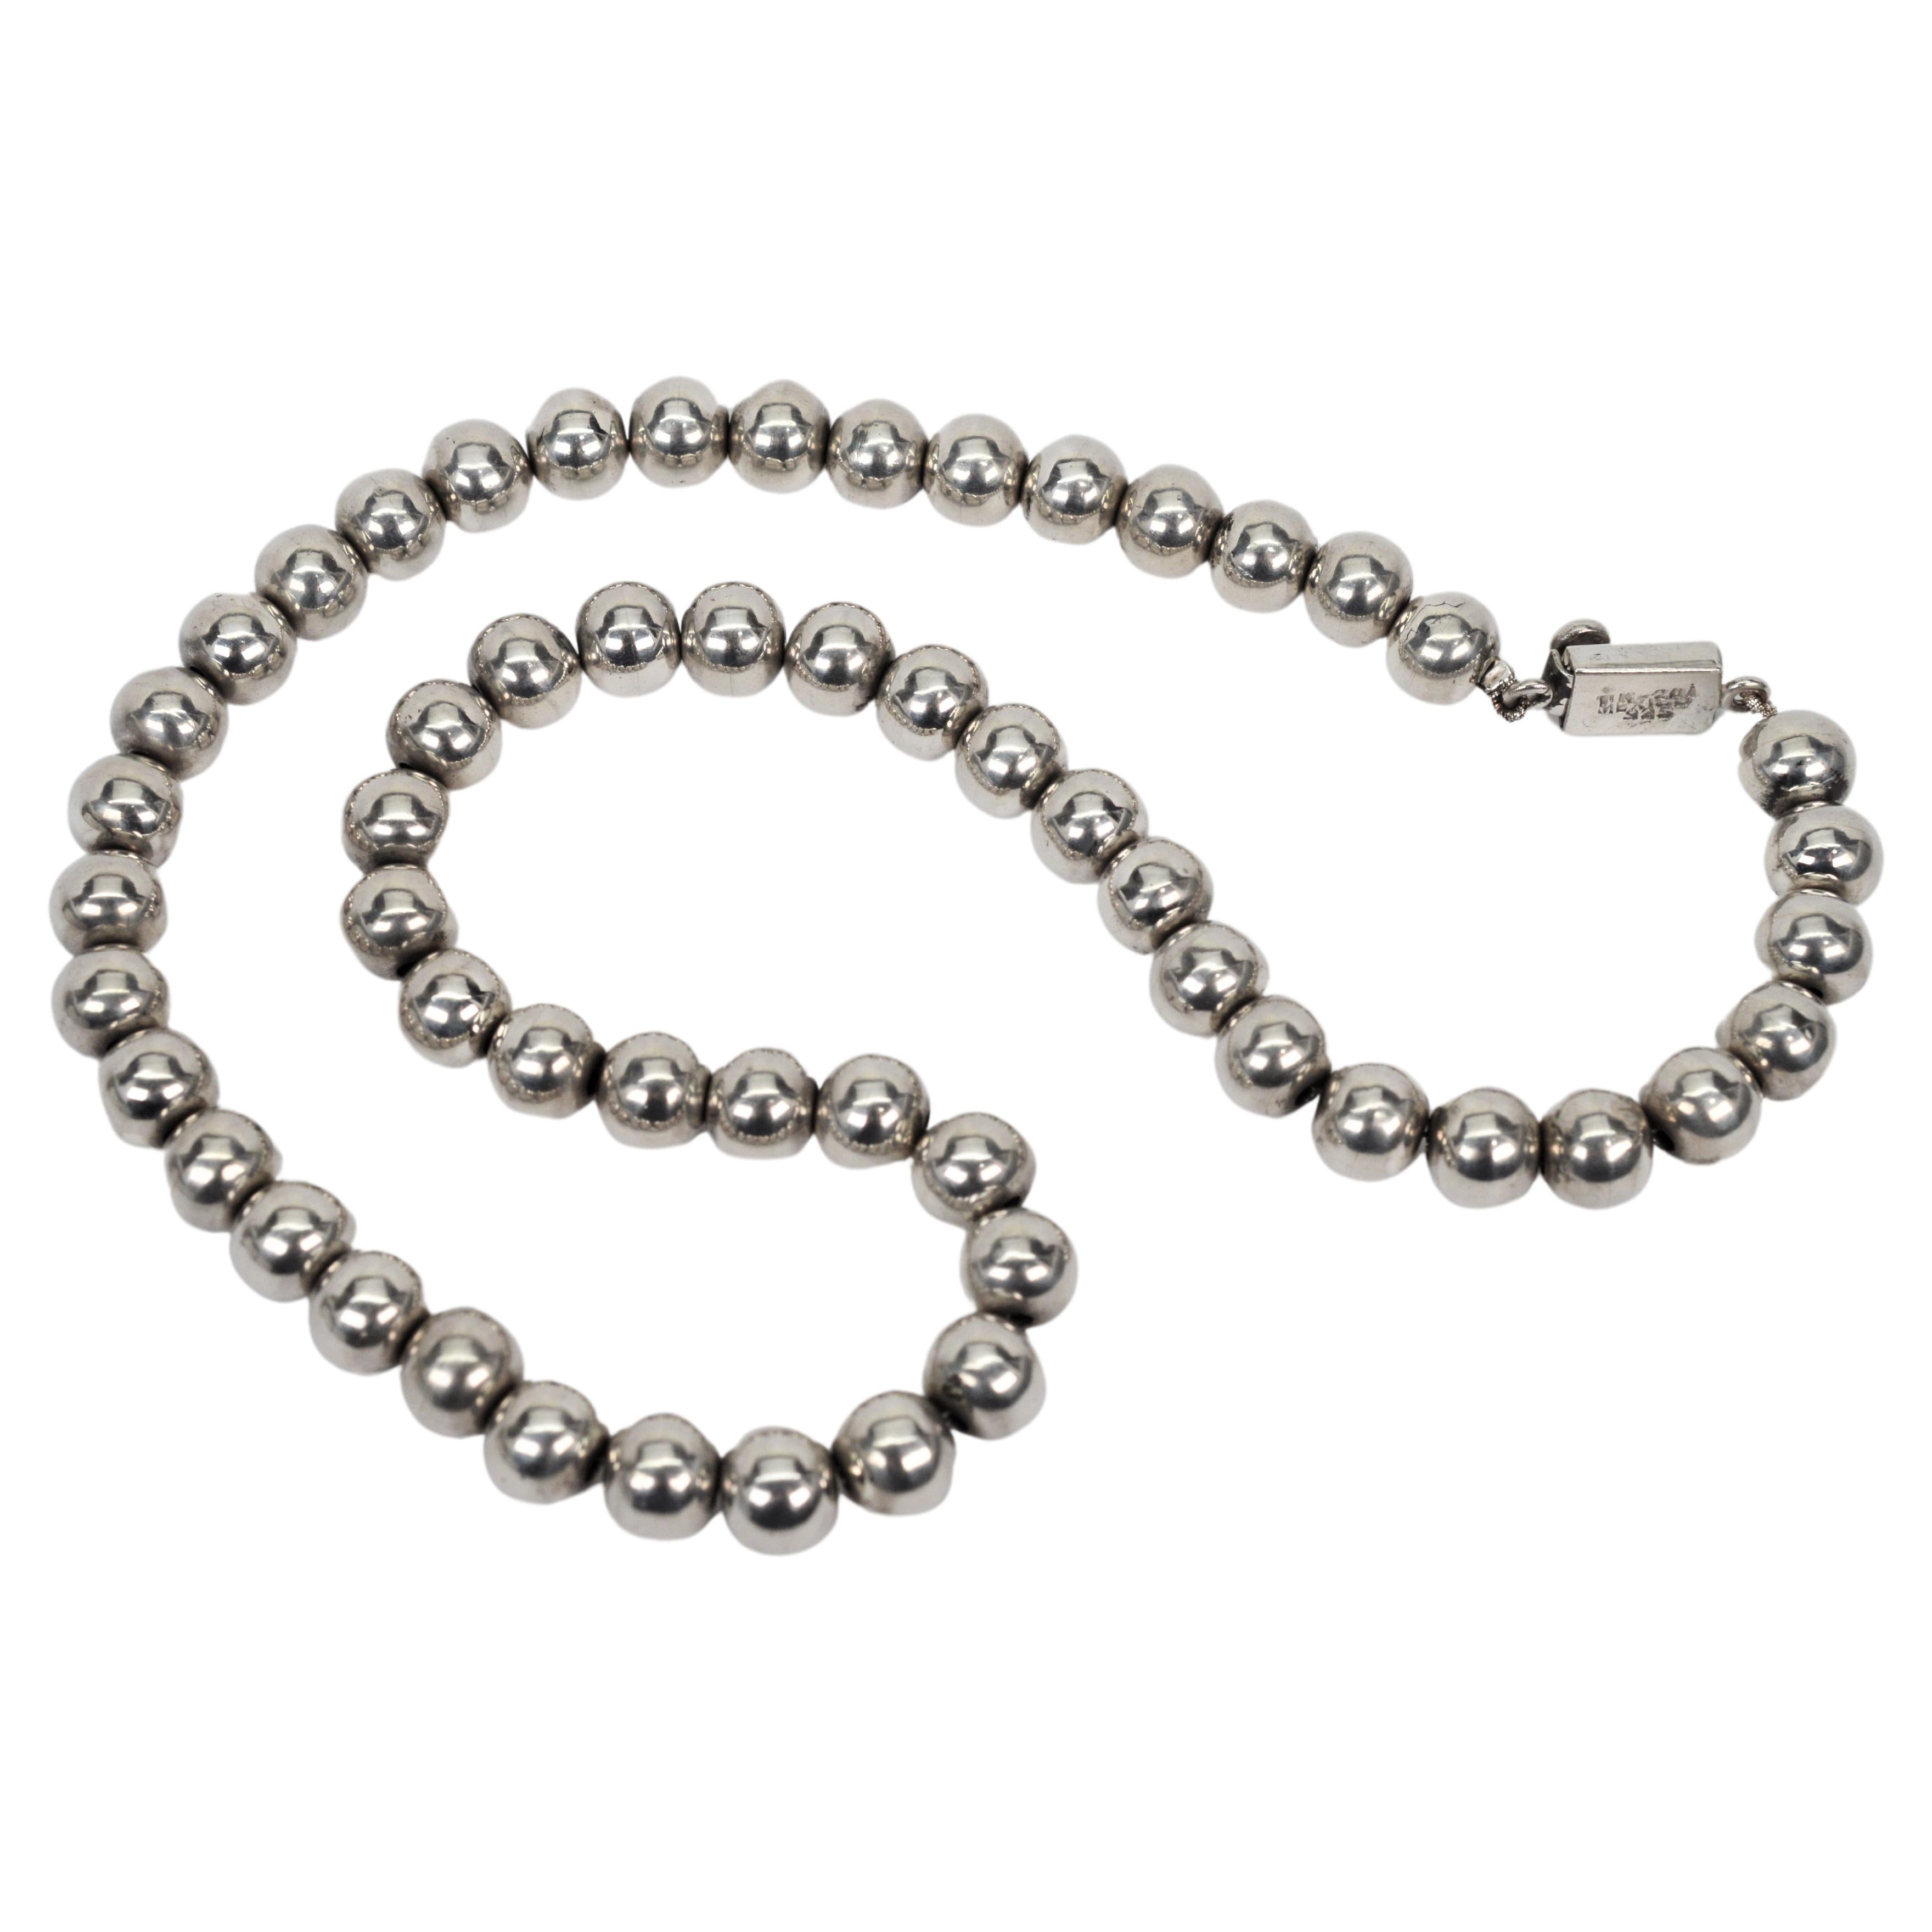 Vintage German Silver Bead Necklace for Women, Southwestern Navajo Pearls  Style Jewelry